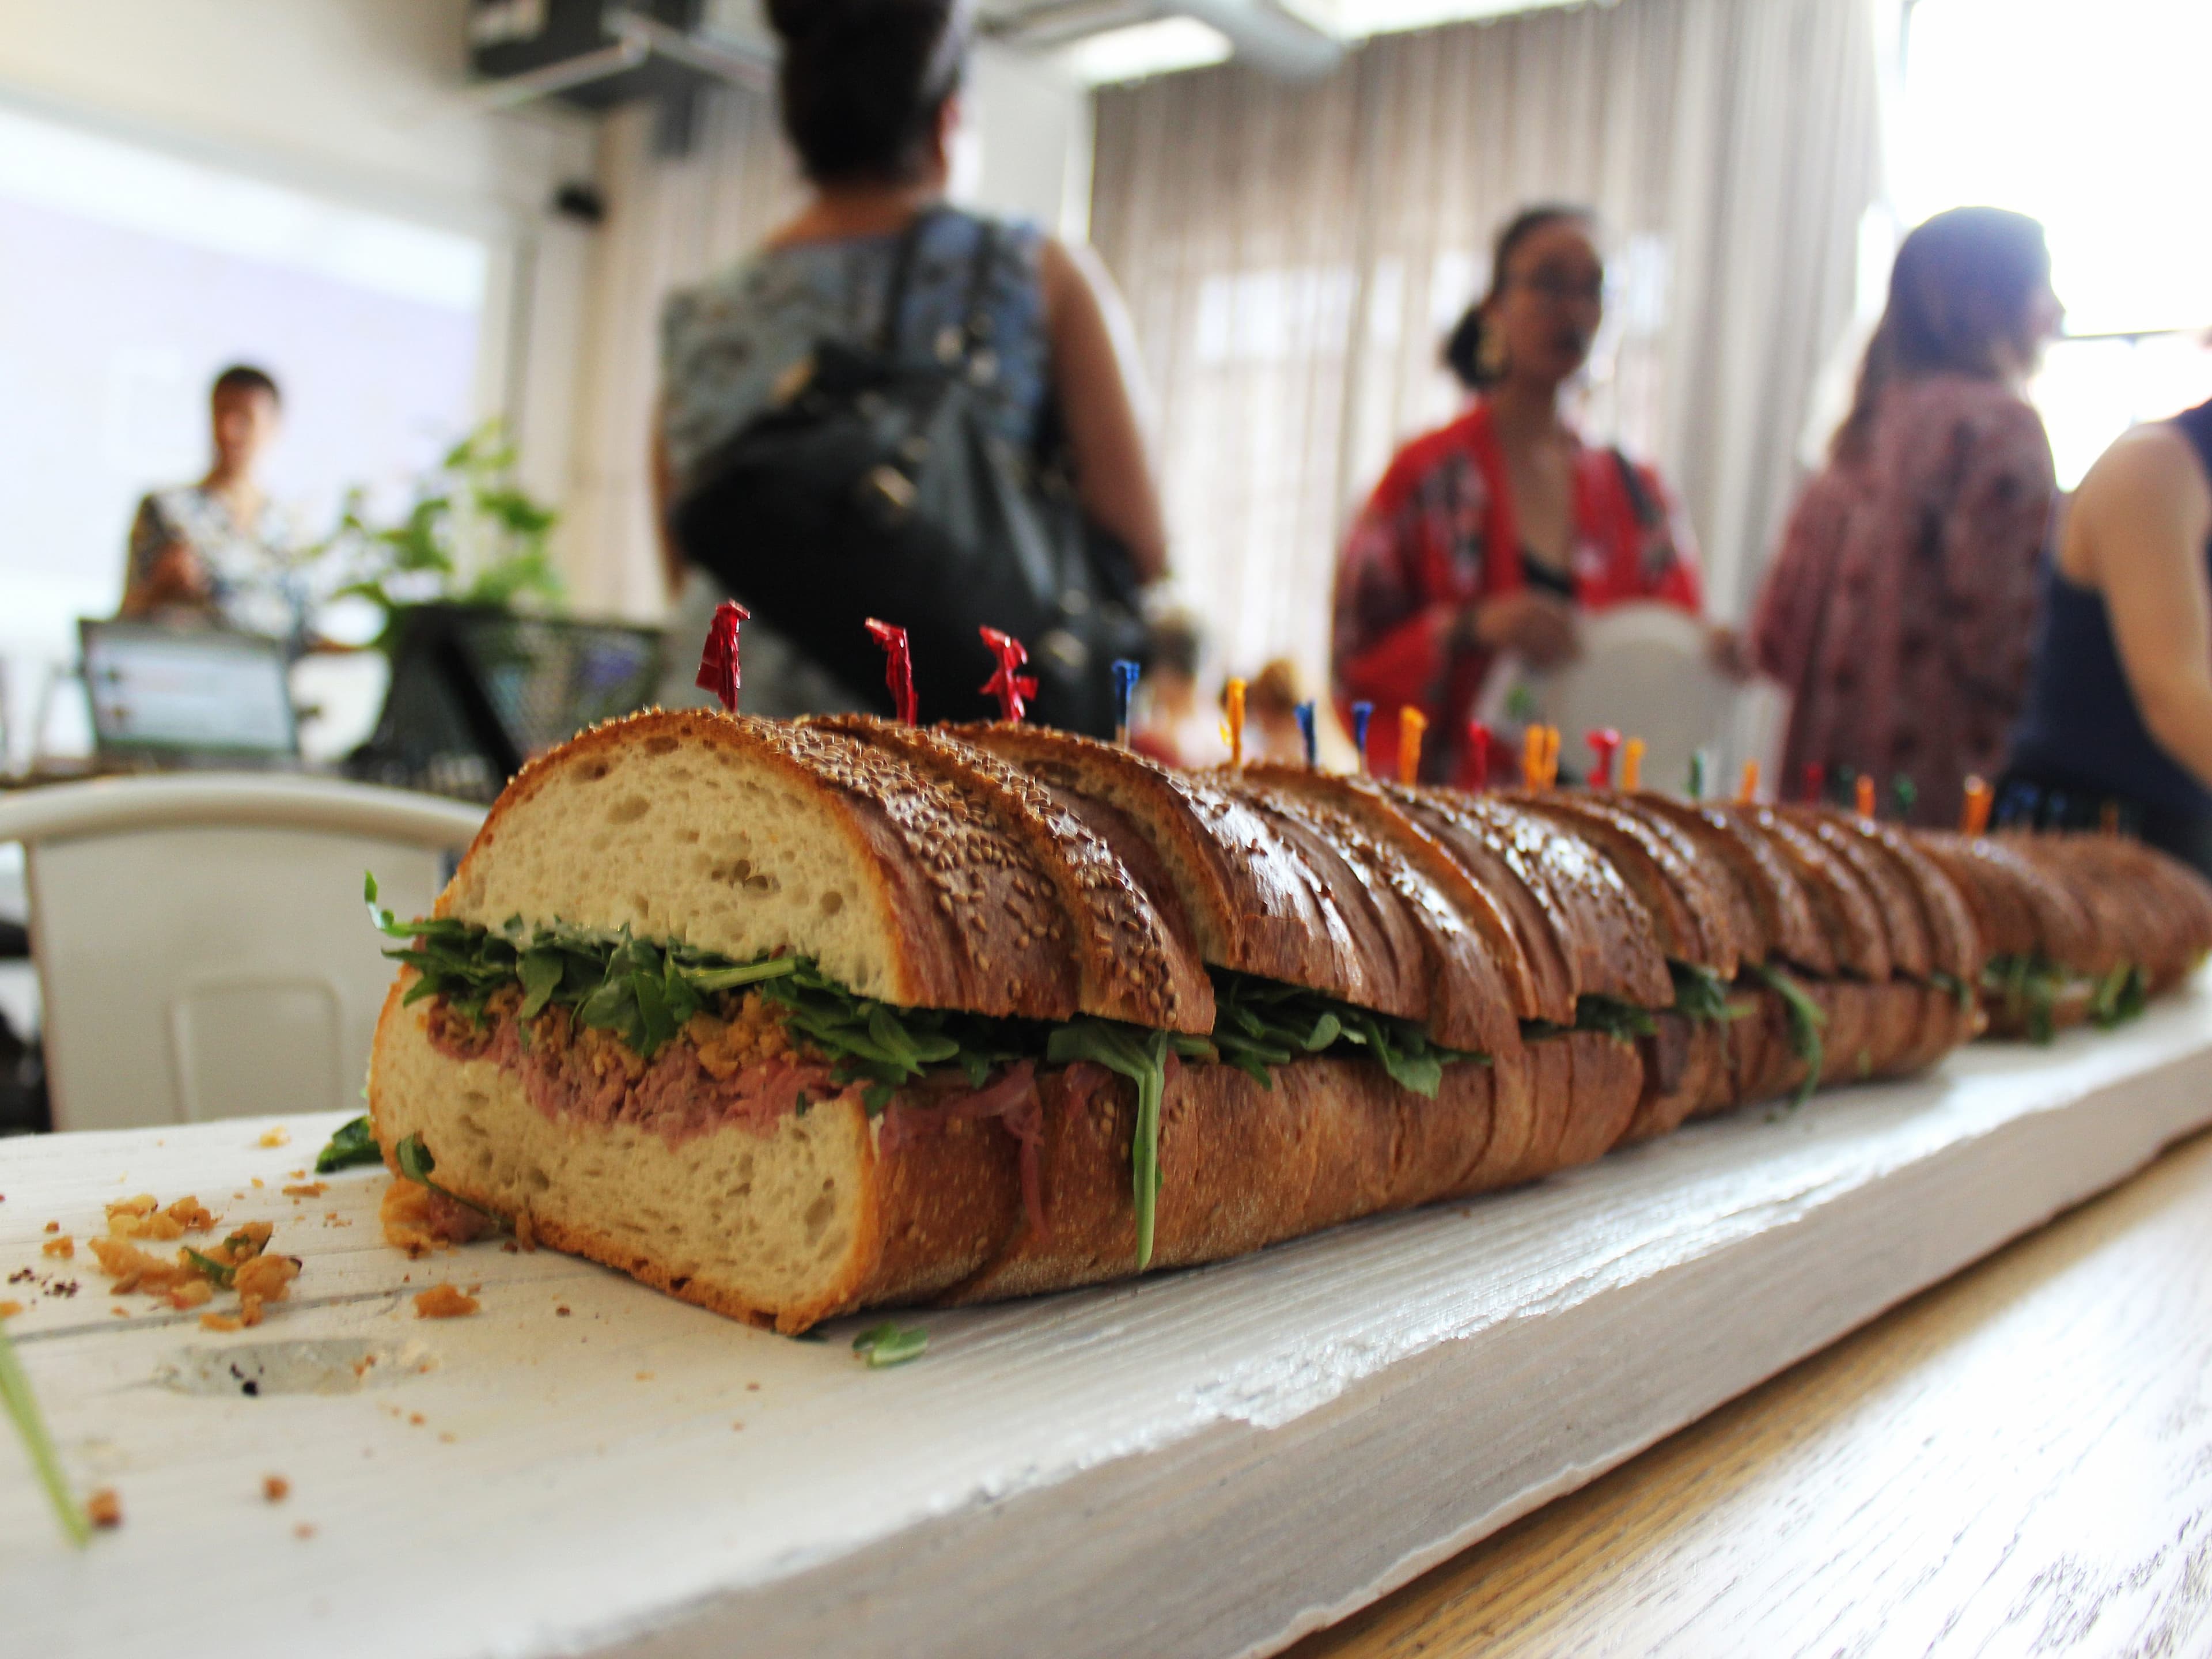 A long sandwich cut into many pieces, with visible greens and packed filling, placed on a white wooden board. In the background, there are several people engaging in conversation in a bright indoor setting.